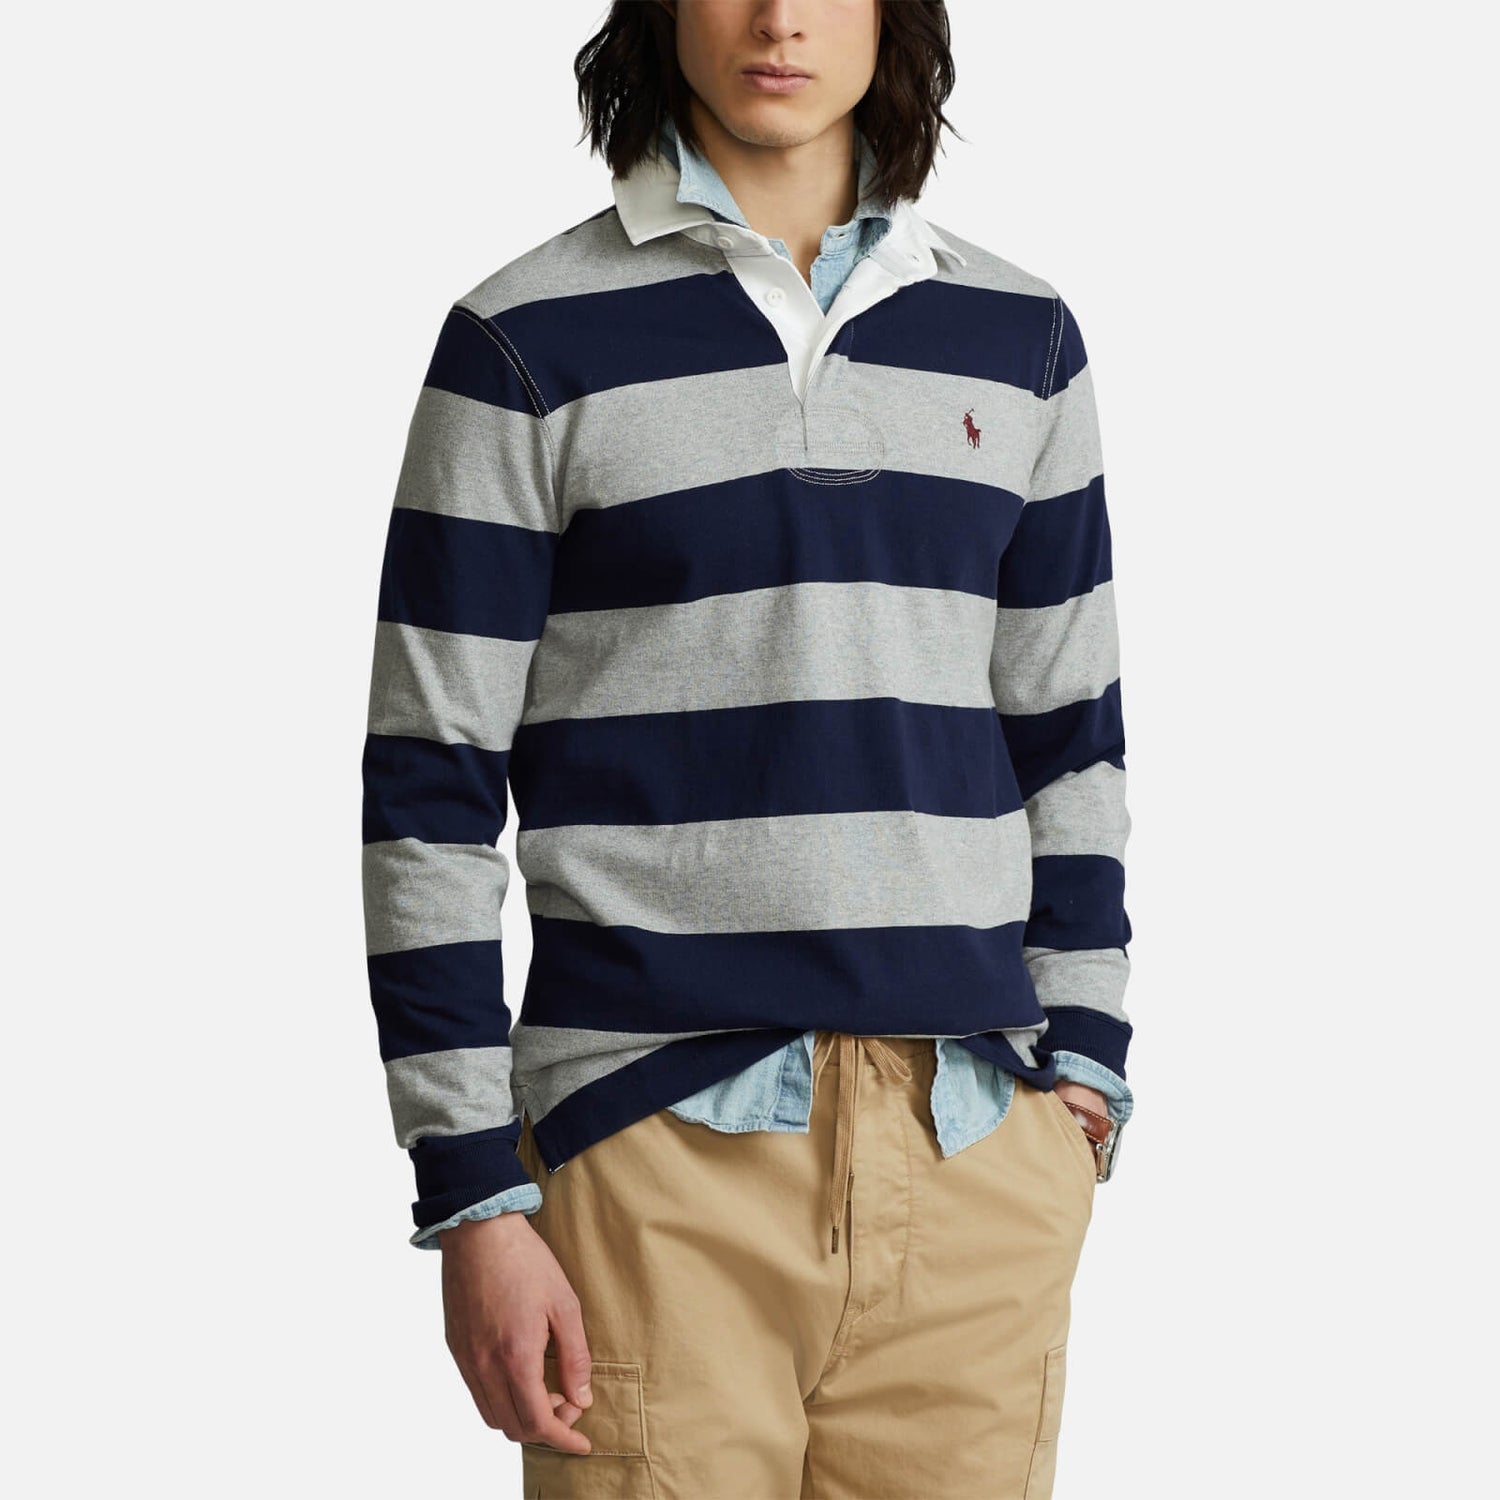 Polo Ralph Lauren Men's Striped Rugby Shirt - League Heather/French Navy - M